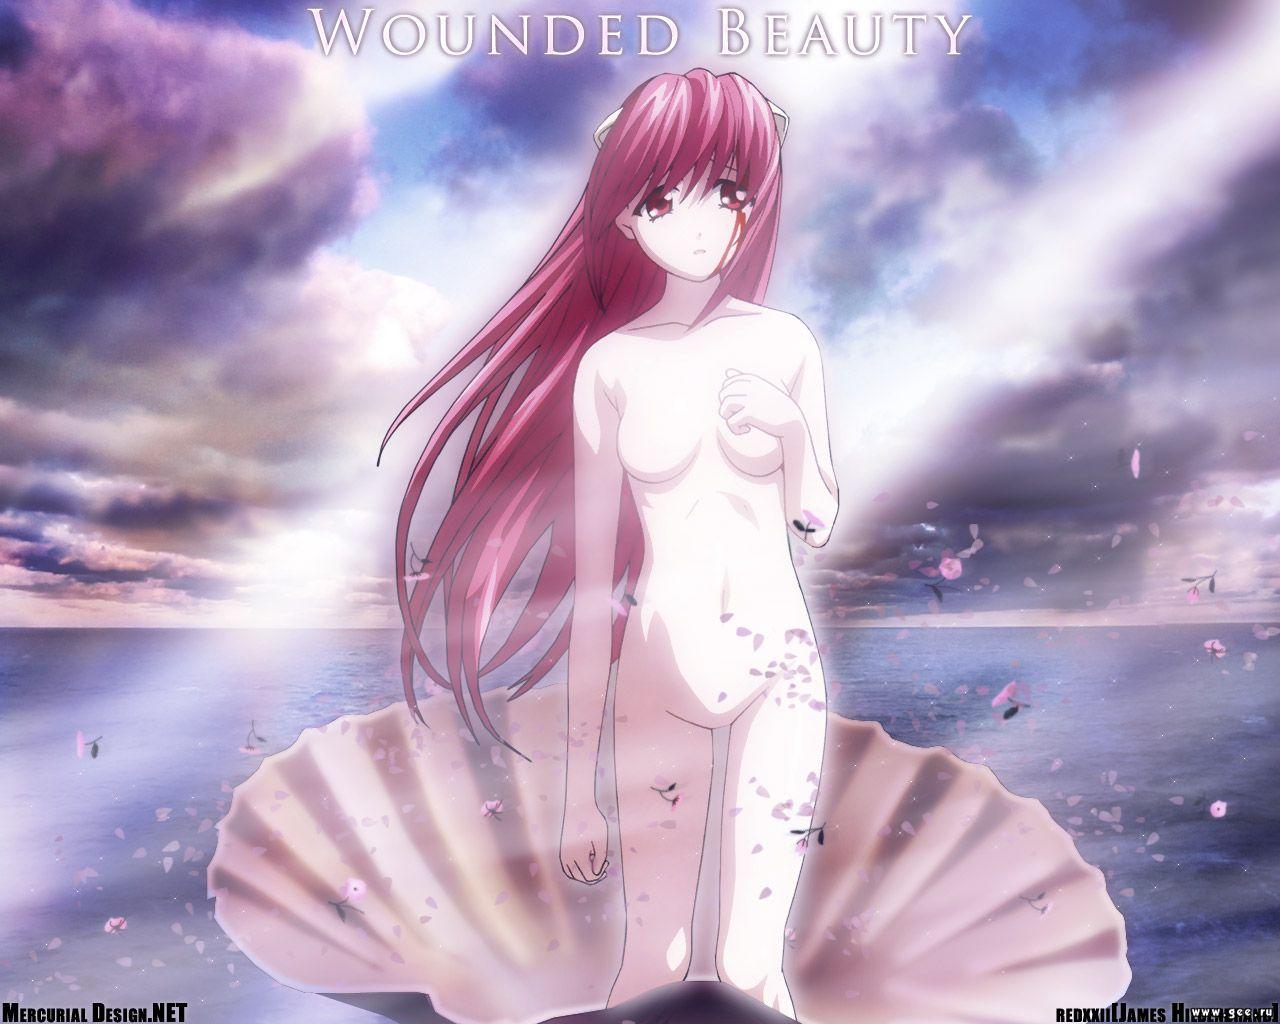 Wallpaper Soft wounded beauty